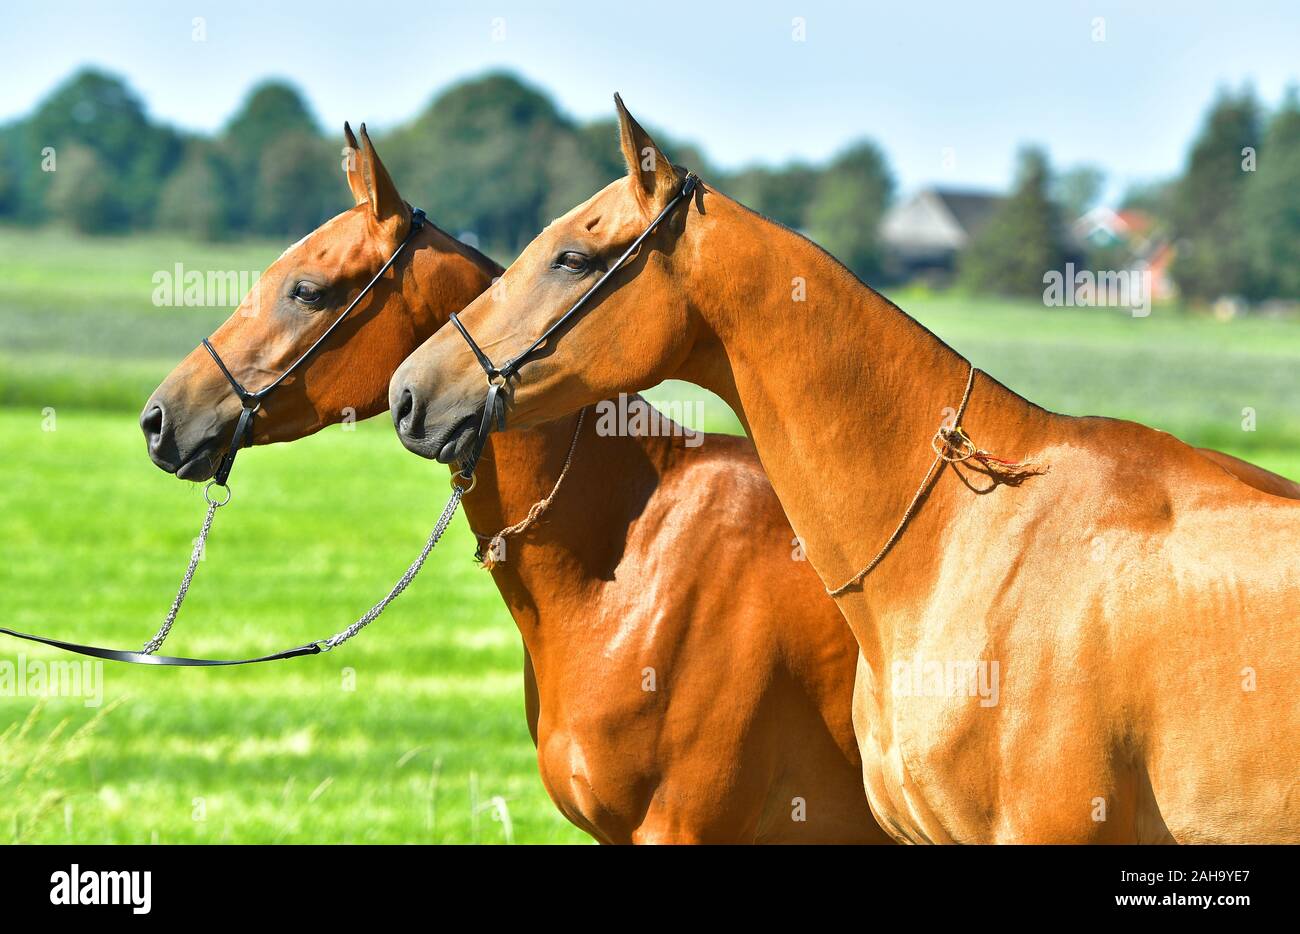 Two Akhal Teke horses standing side by side in the summer field. Animal portrait. Stock Photo